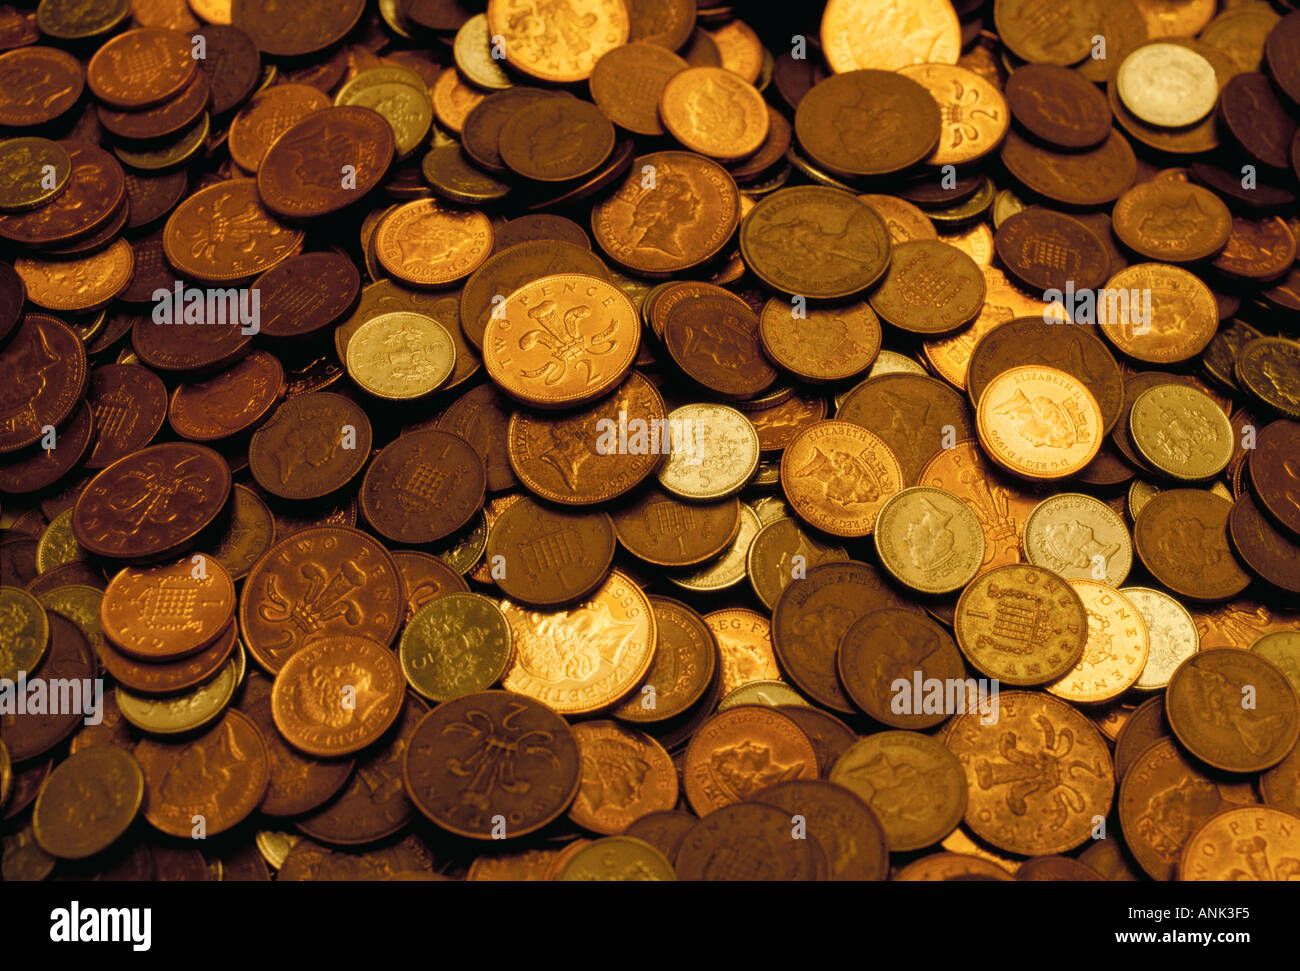 PILE OF TWO PENCE AND FIVE PENCE STERLING COINS Stock Photo